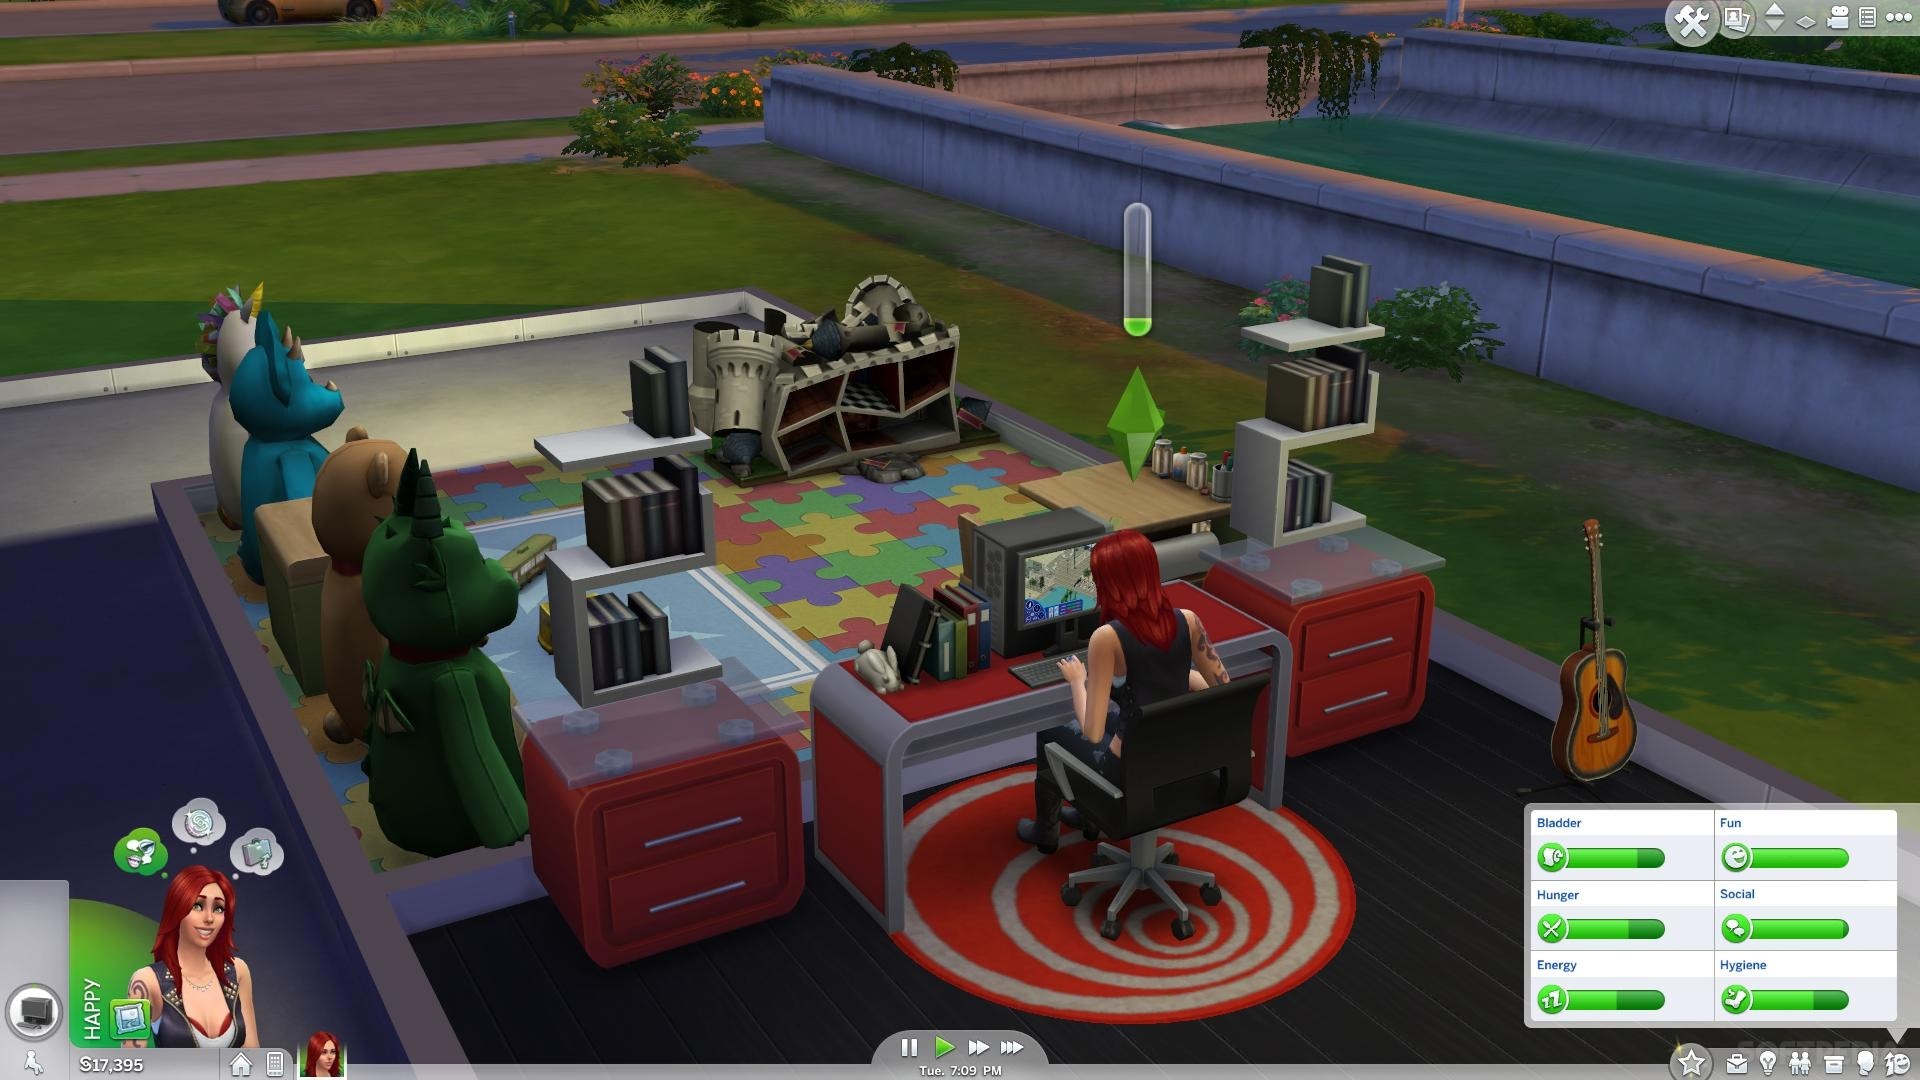 The Sims 4 Sort Of Brief In-Game Guide. The-sims-4-review-pc-457622-19